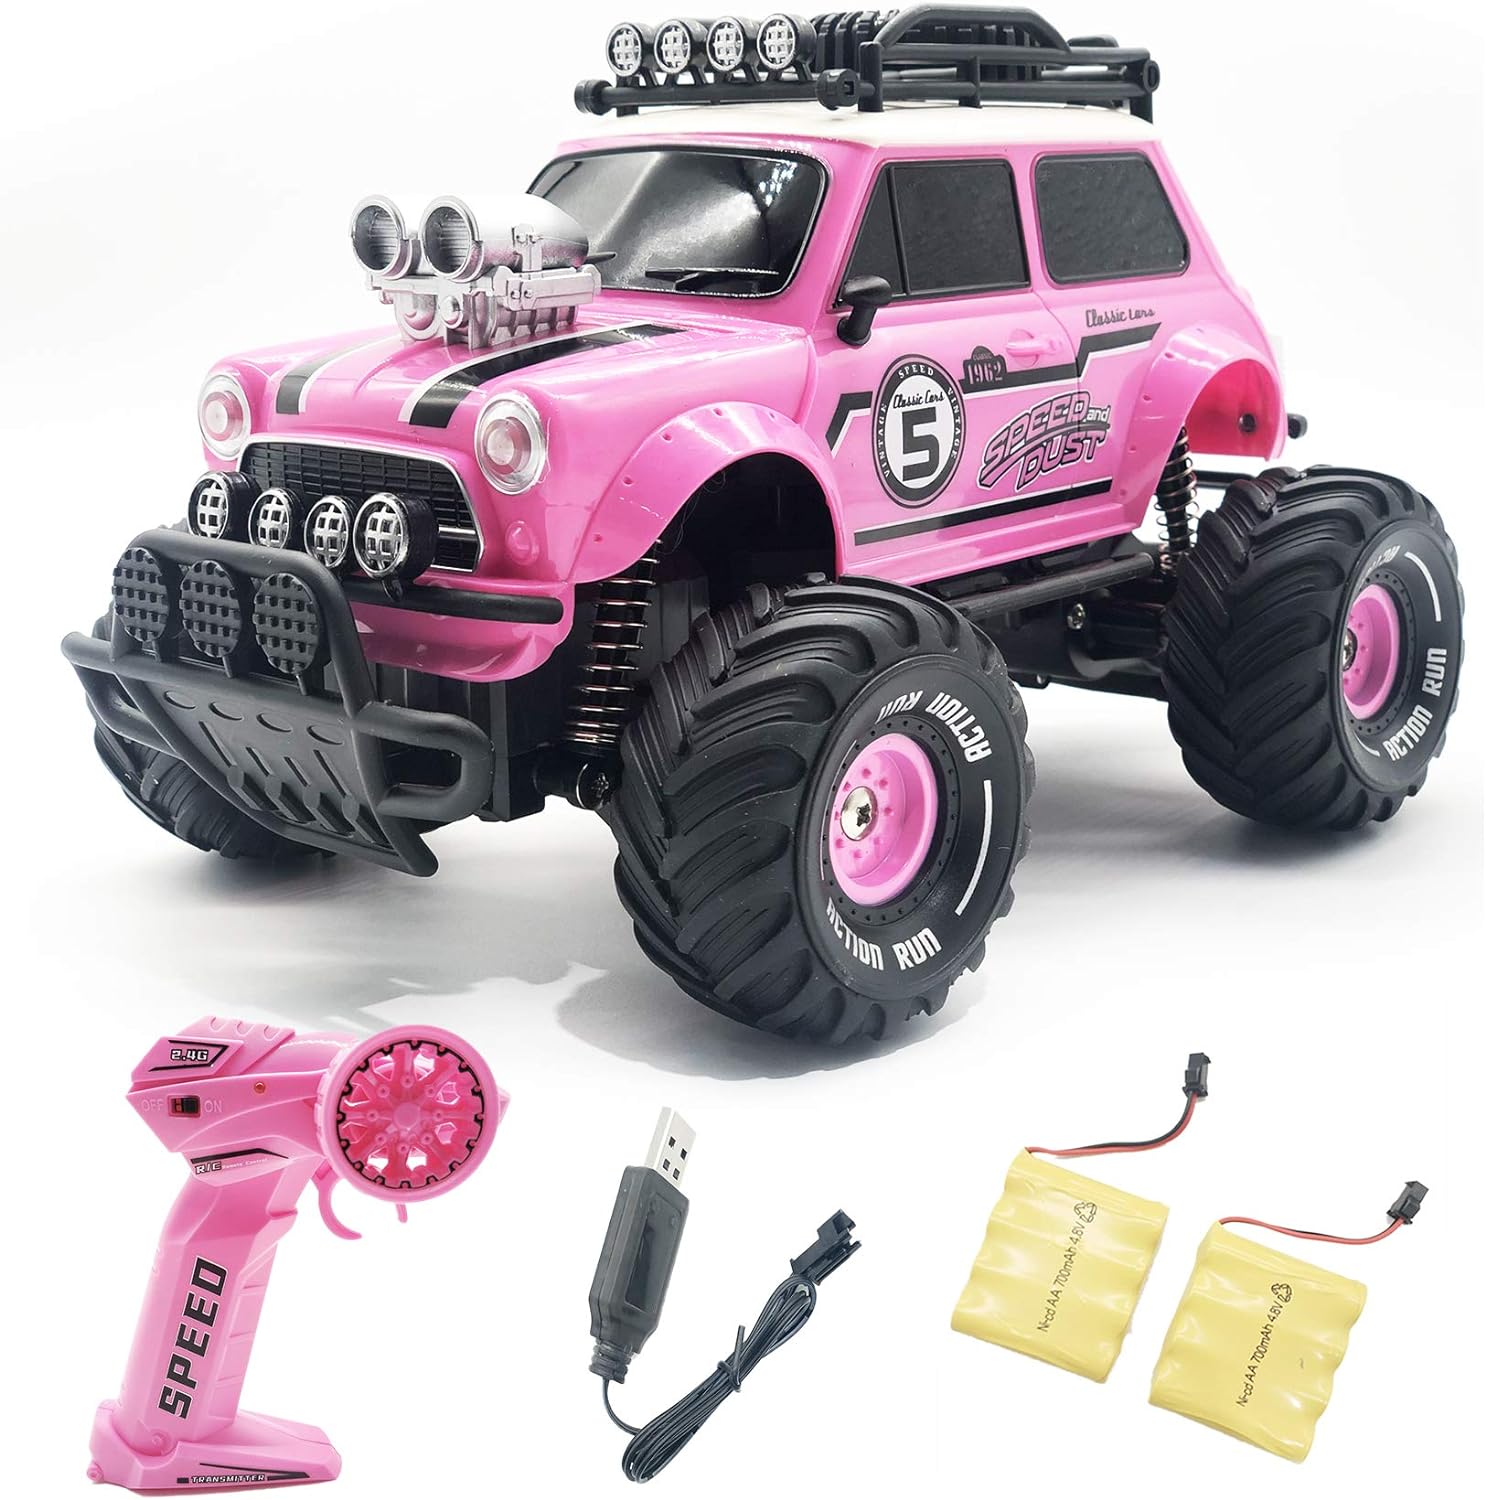 10Leccion Remote Control Car for Girls, 2.4Ghz Pink RC Cars for Daughter with Two Rechargeable Batteries, Radio Controlled Vehicle for Toddlers Kids, Birthday R/C Toys for Granddaughter